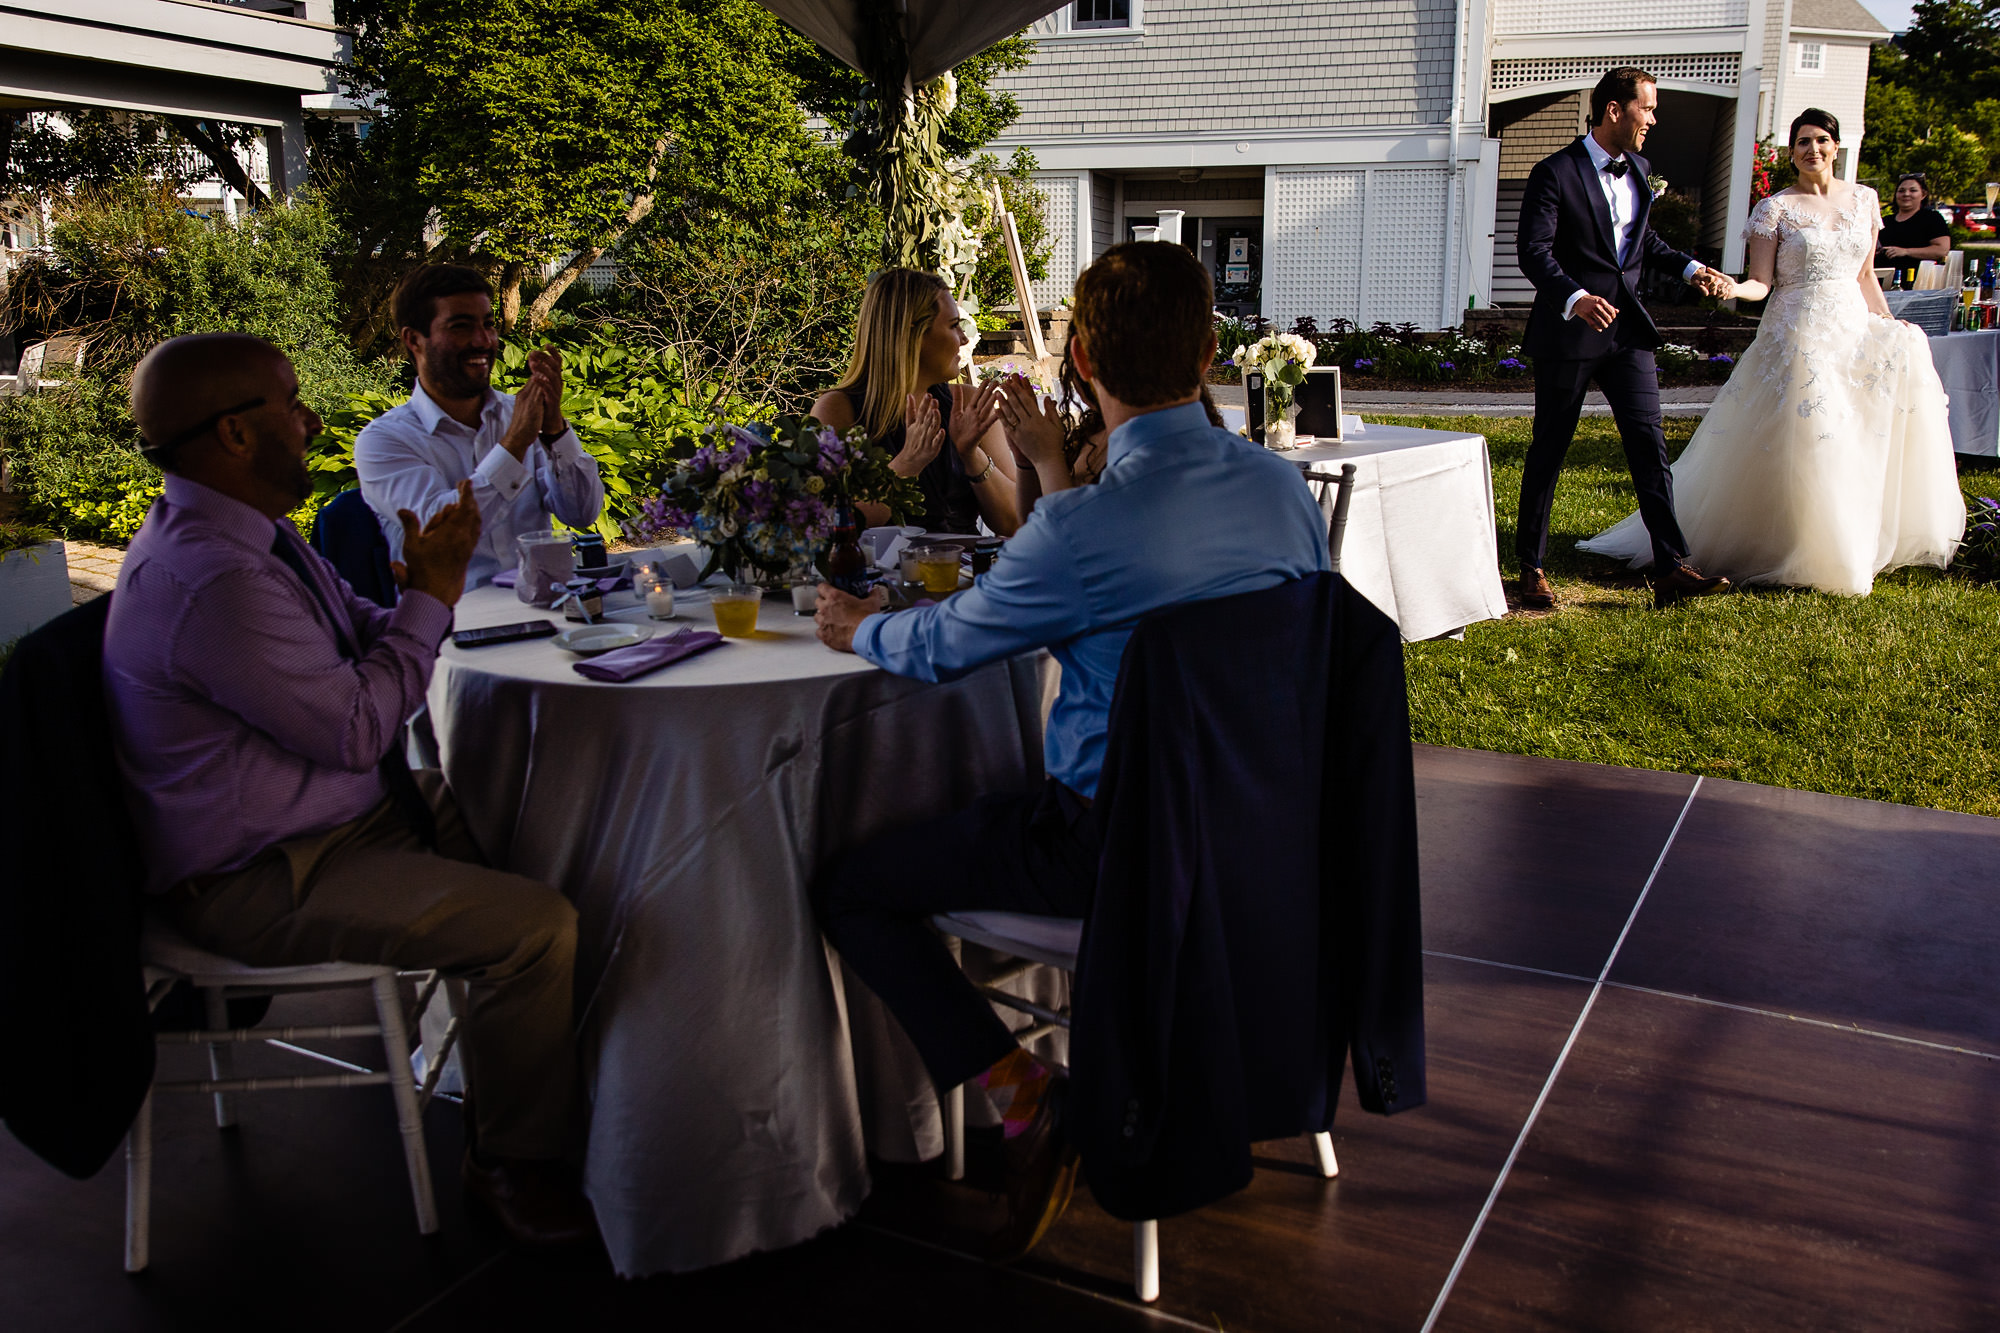 A tented wedding reception at the Beachmere Inn in Ogunquit, Maine